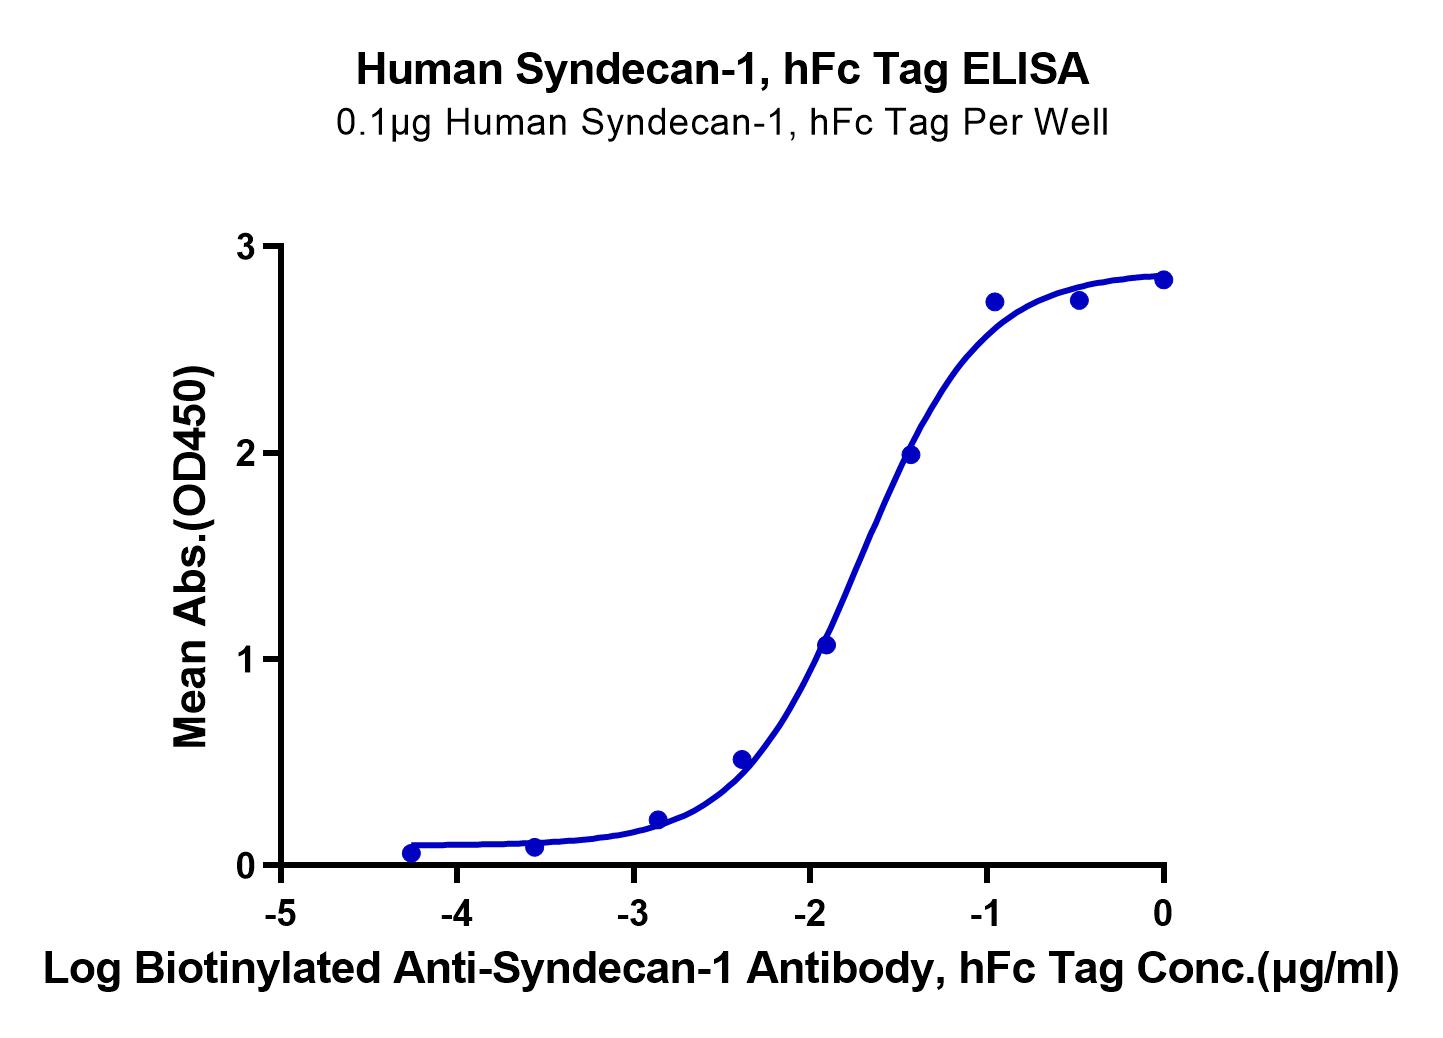 Human Syndecan-1 Protein (LTP10633)